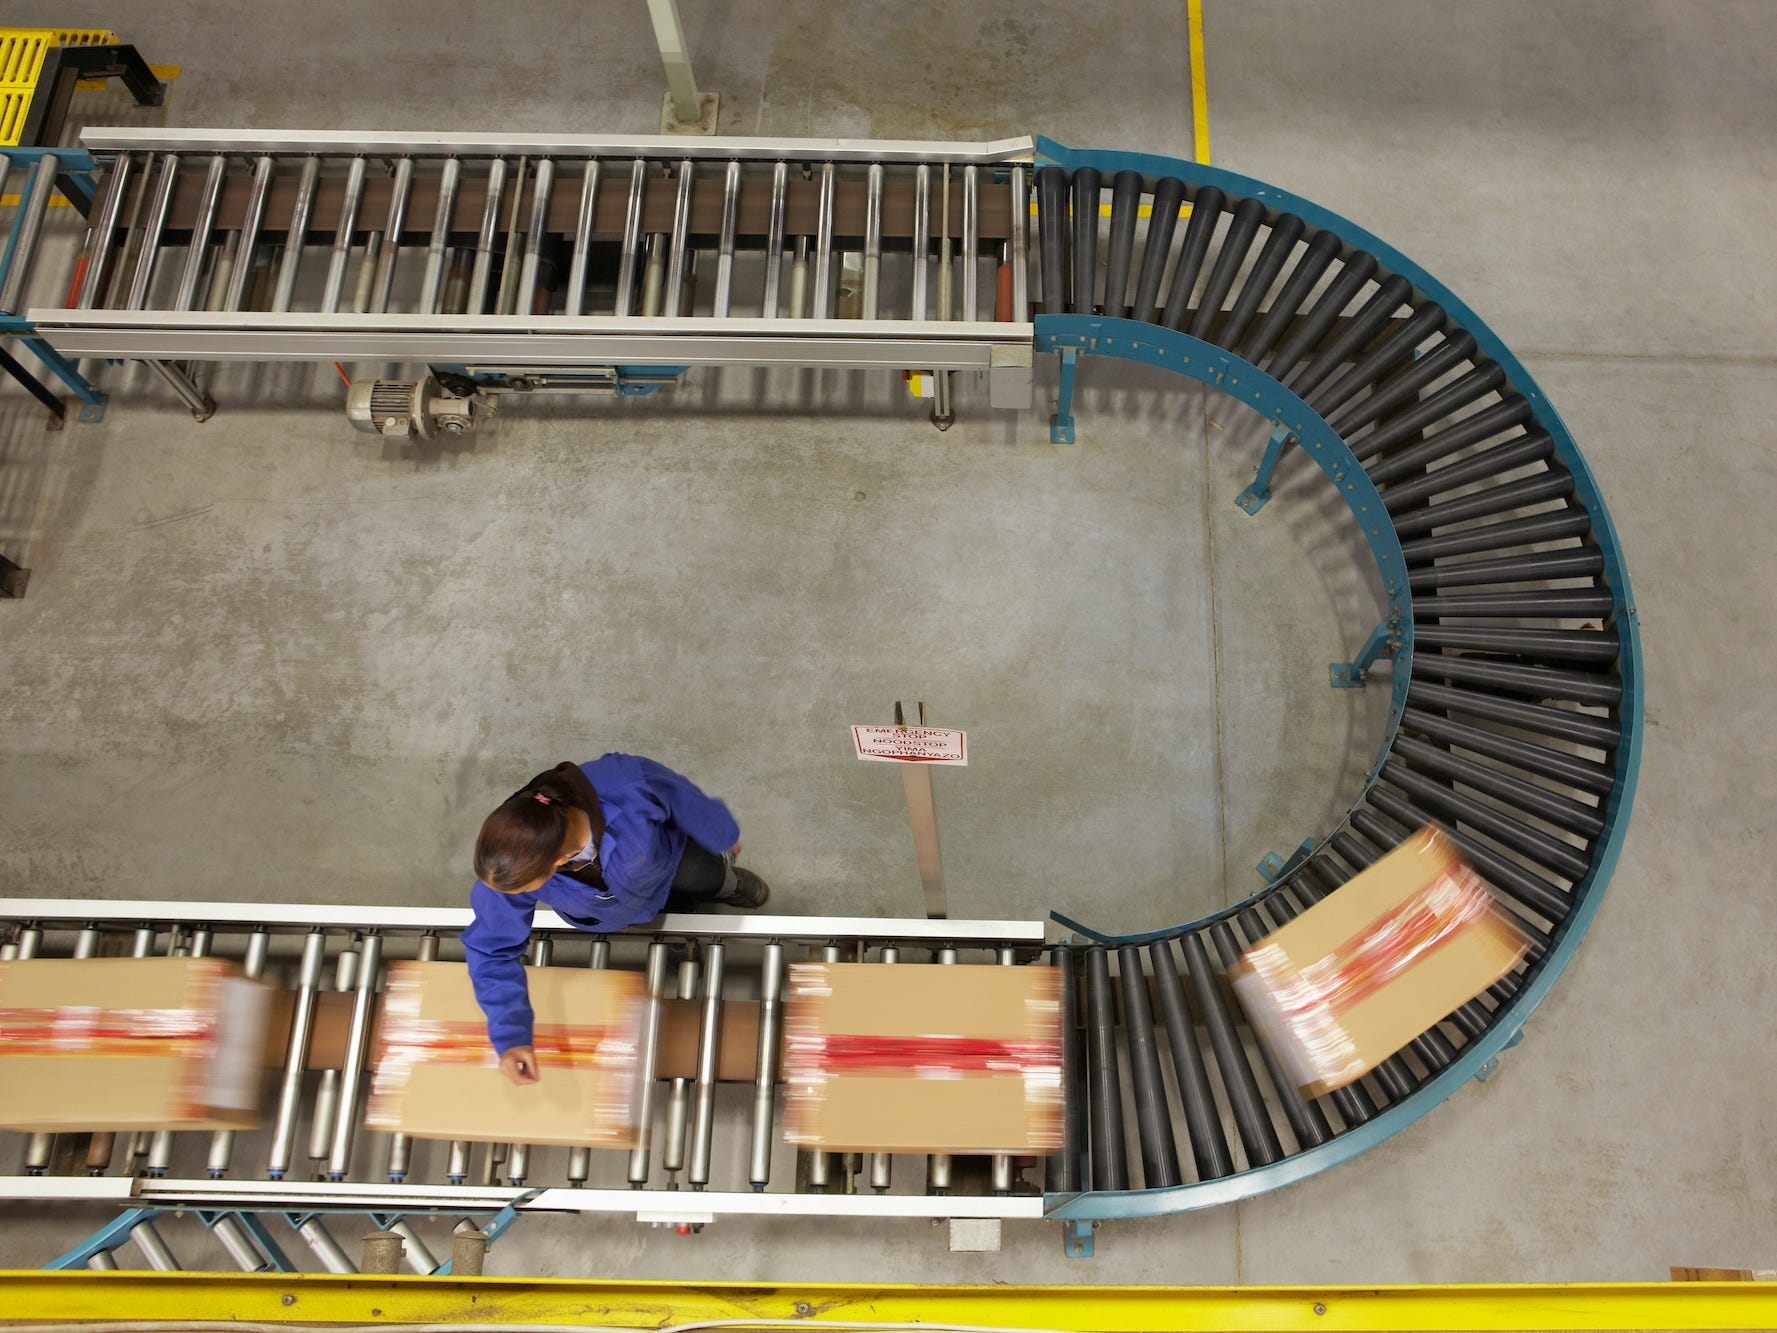 worker scanning boxes on a conveyor belt in a warehouse